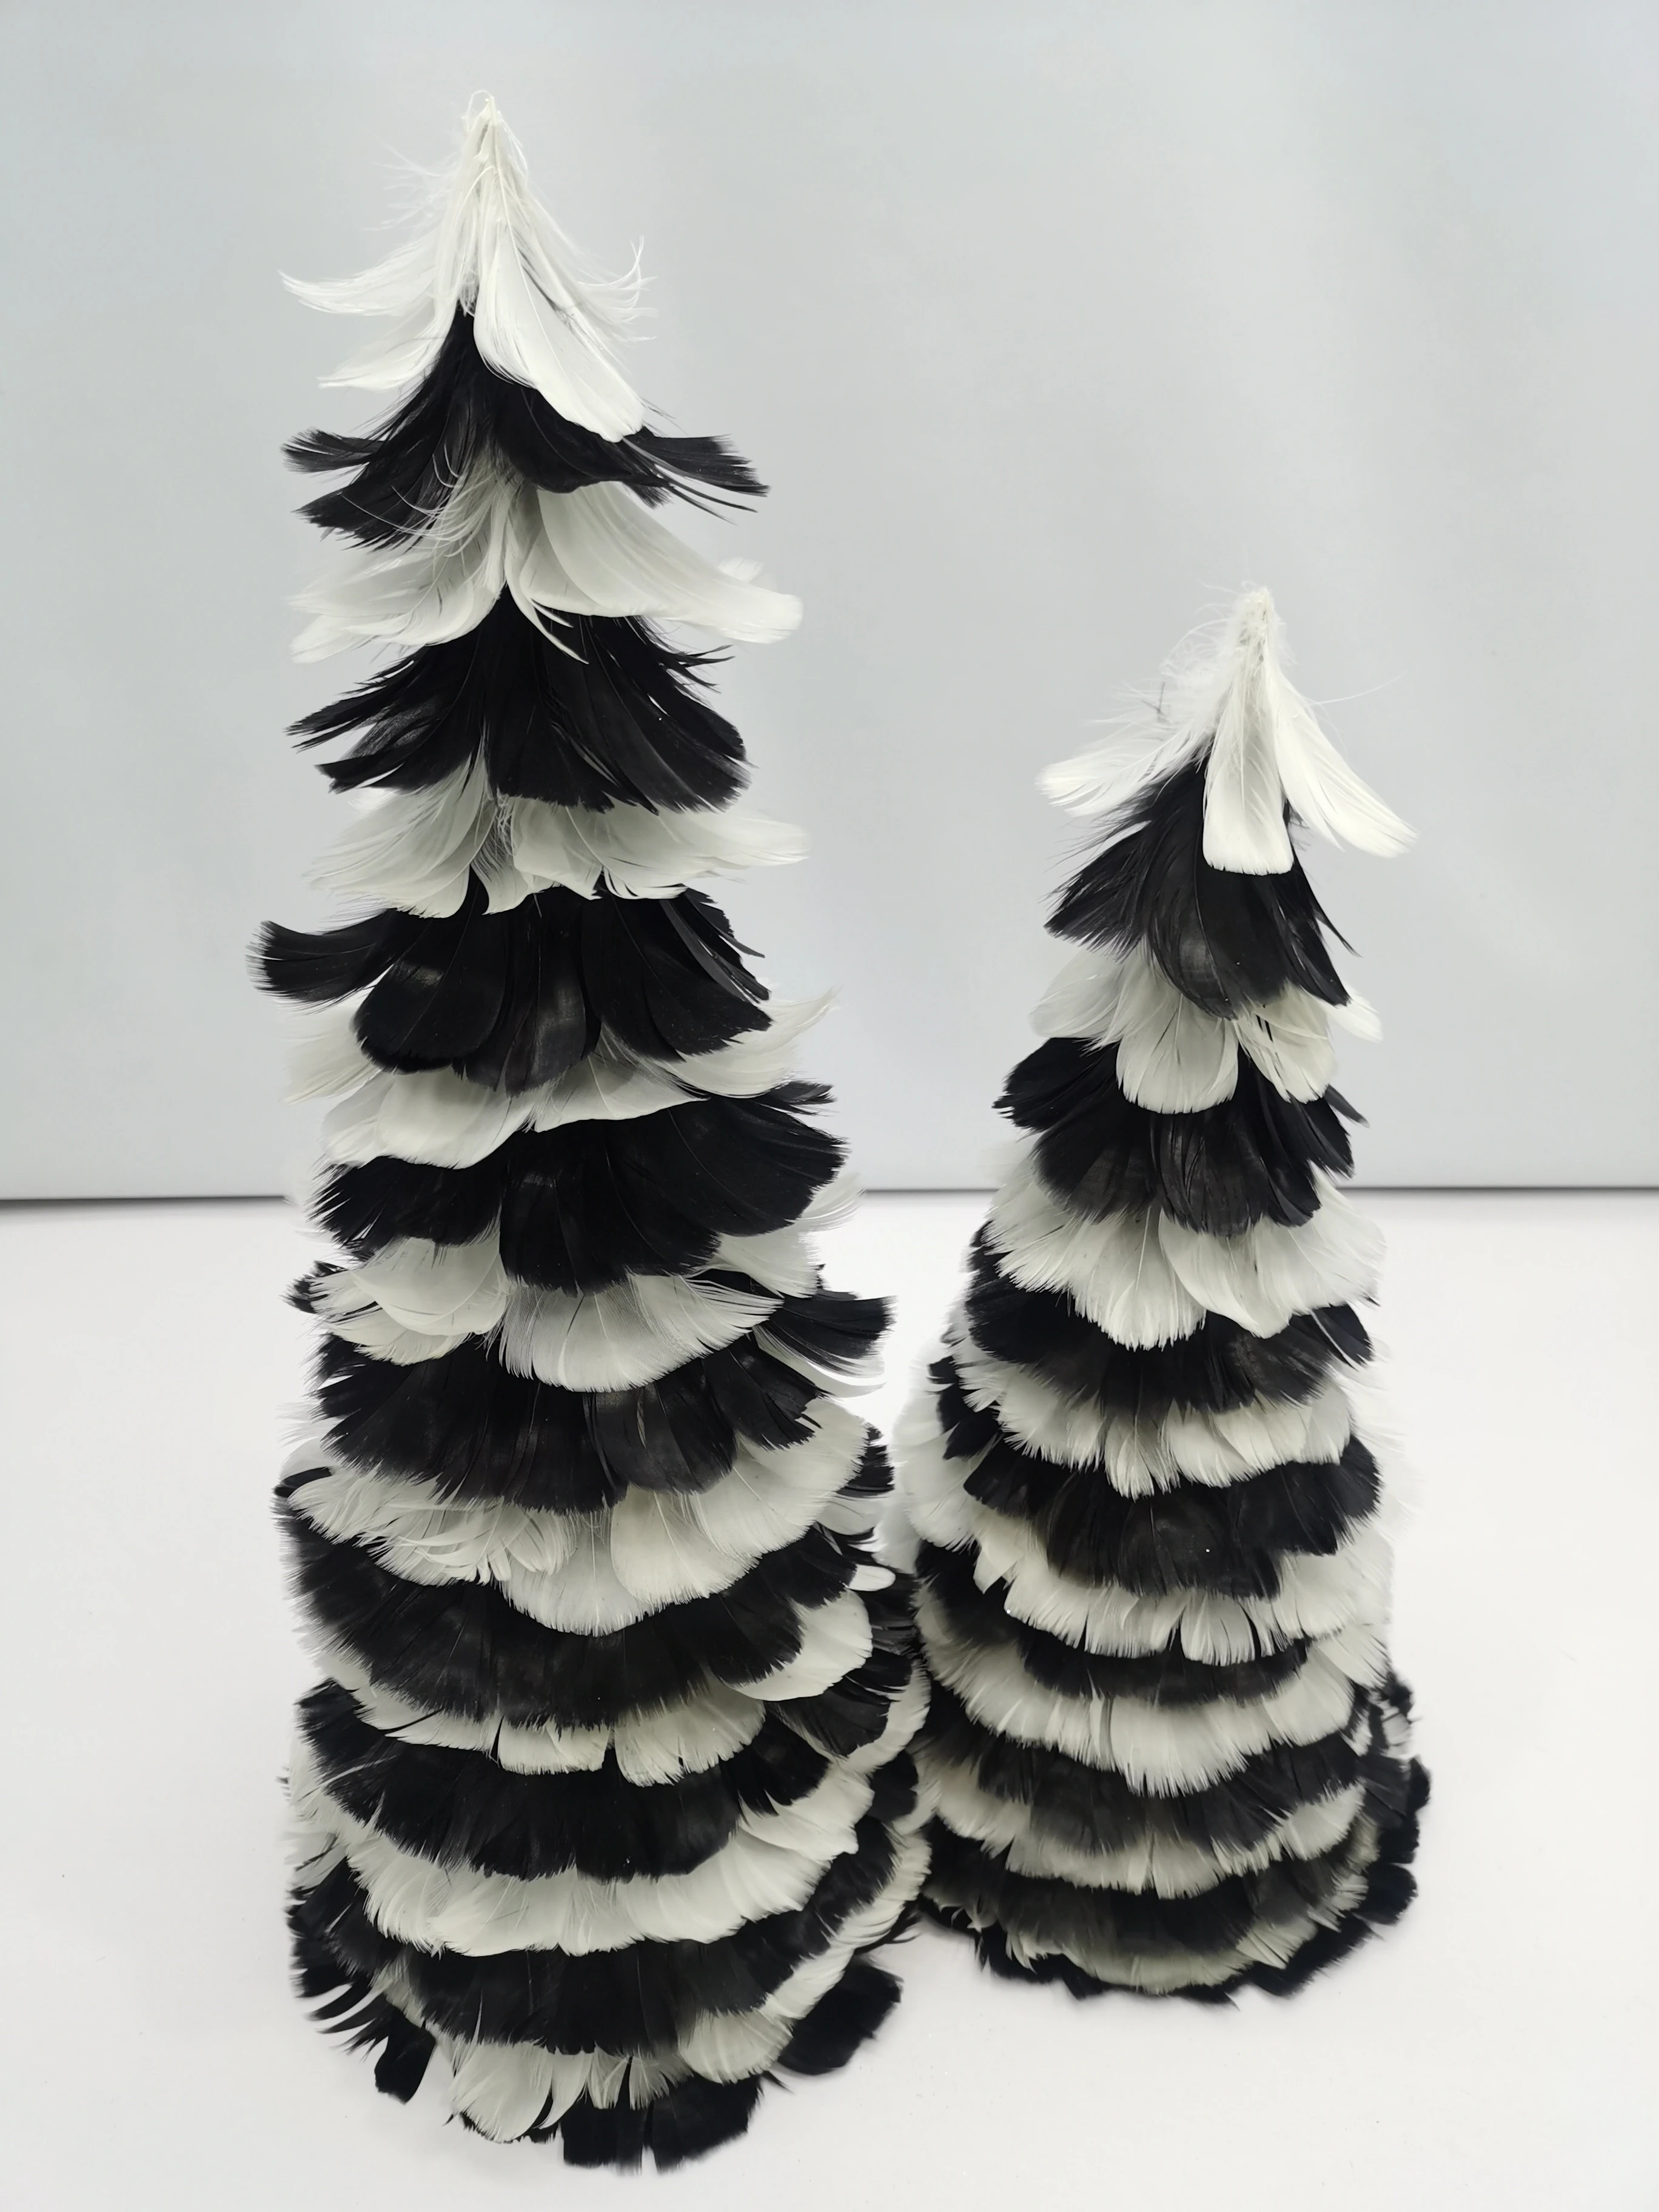 Wholesale Black white Feathers For Crafts Carnival Home Wedding Decorations plumes